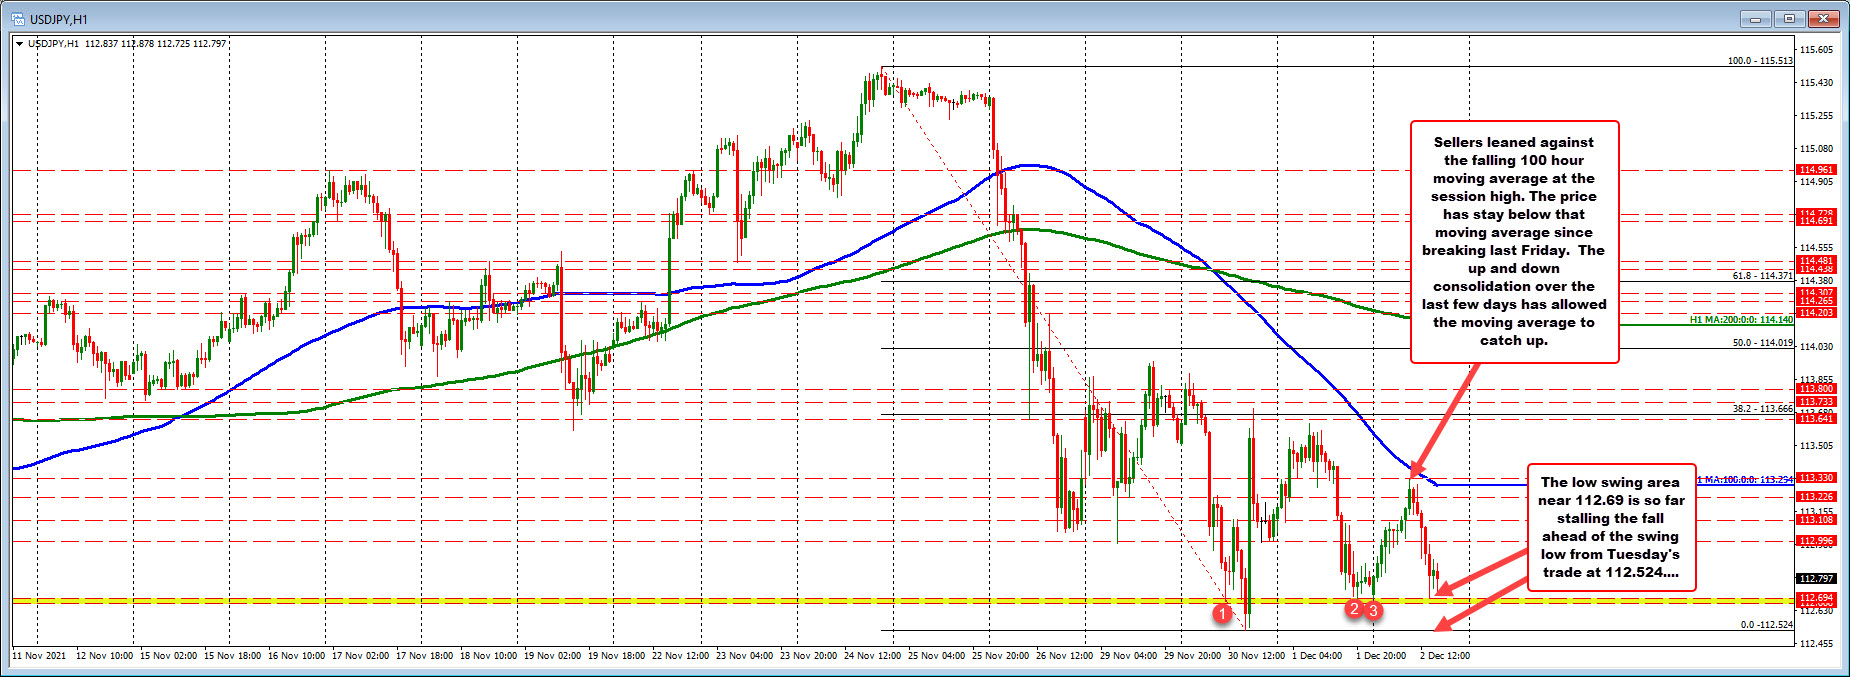 Price remains below the 100 hour moving average for the fifth consecutive day_